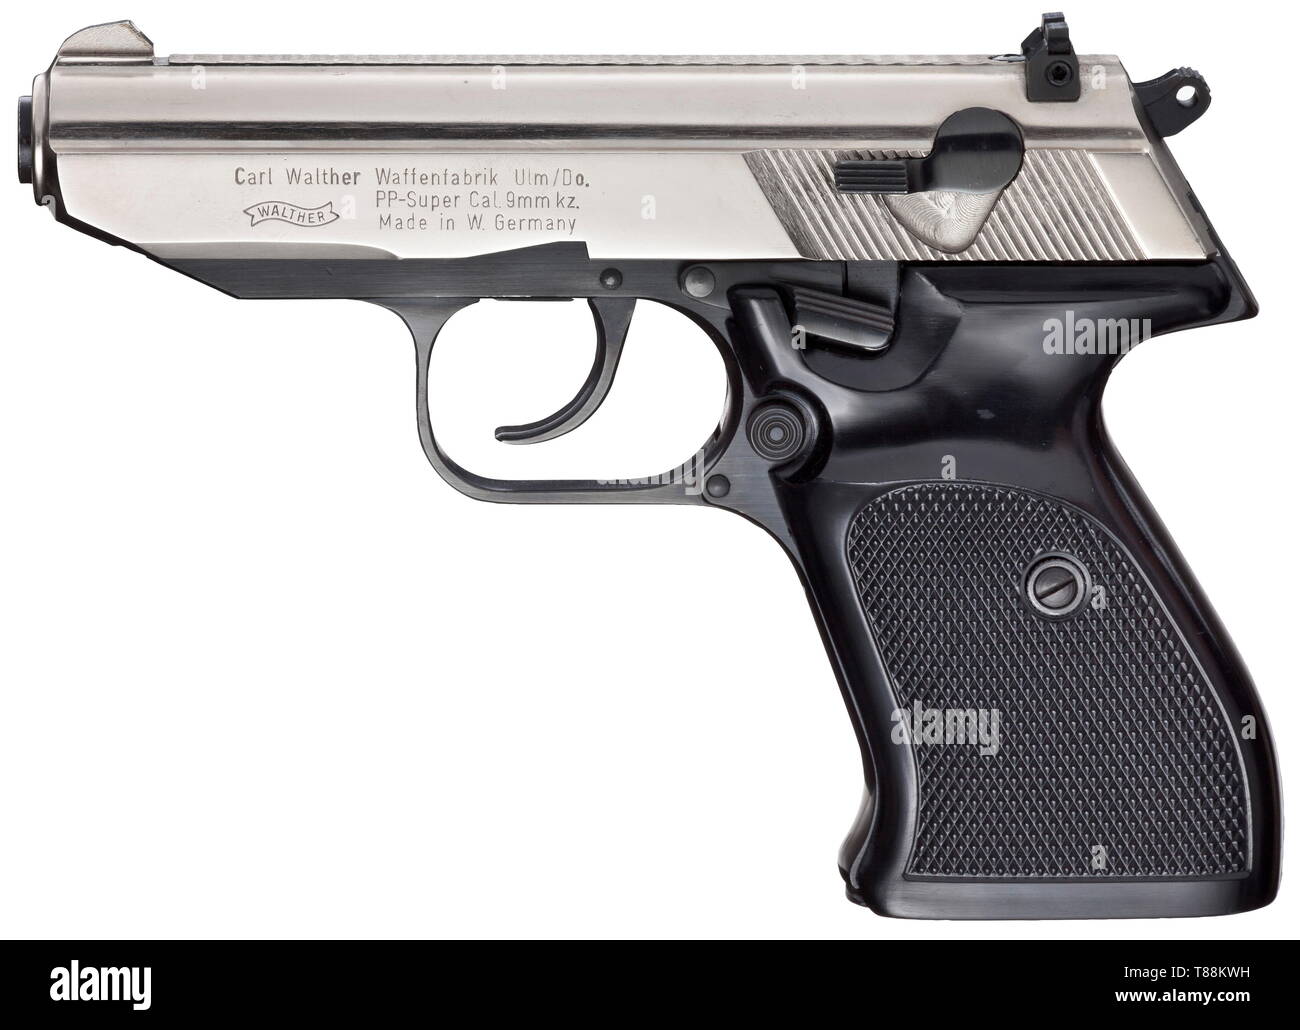 A Walther PP Super, special model in cal. 9 mm short No. 100355. Matching numbers. Bright bore. Proof-marked 1978. Standard inscription. Slide highly polished, nickel-plated. Grip frame blued. Black plastic grip panels. Magazine. Brand-new, unique model for collectors. The PP Super number range in special calibre 9 mm short ran from 100 001 - 101 300. Total manufacture: merely 1300 weapons. Of those Interarms imported 1000 weapons for the US market. The remaining 300 were sold on the European market. Erwerbsscheinpflichtig. historic, historical, , Additional-Rights-Clearance-Info-Not-Available Stock Photo